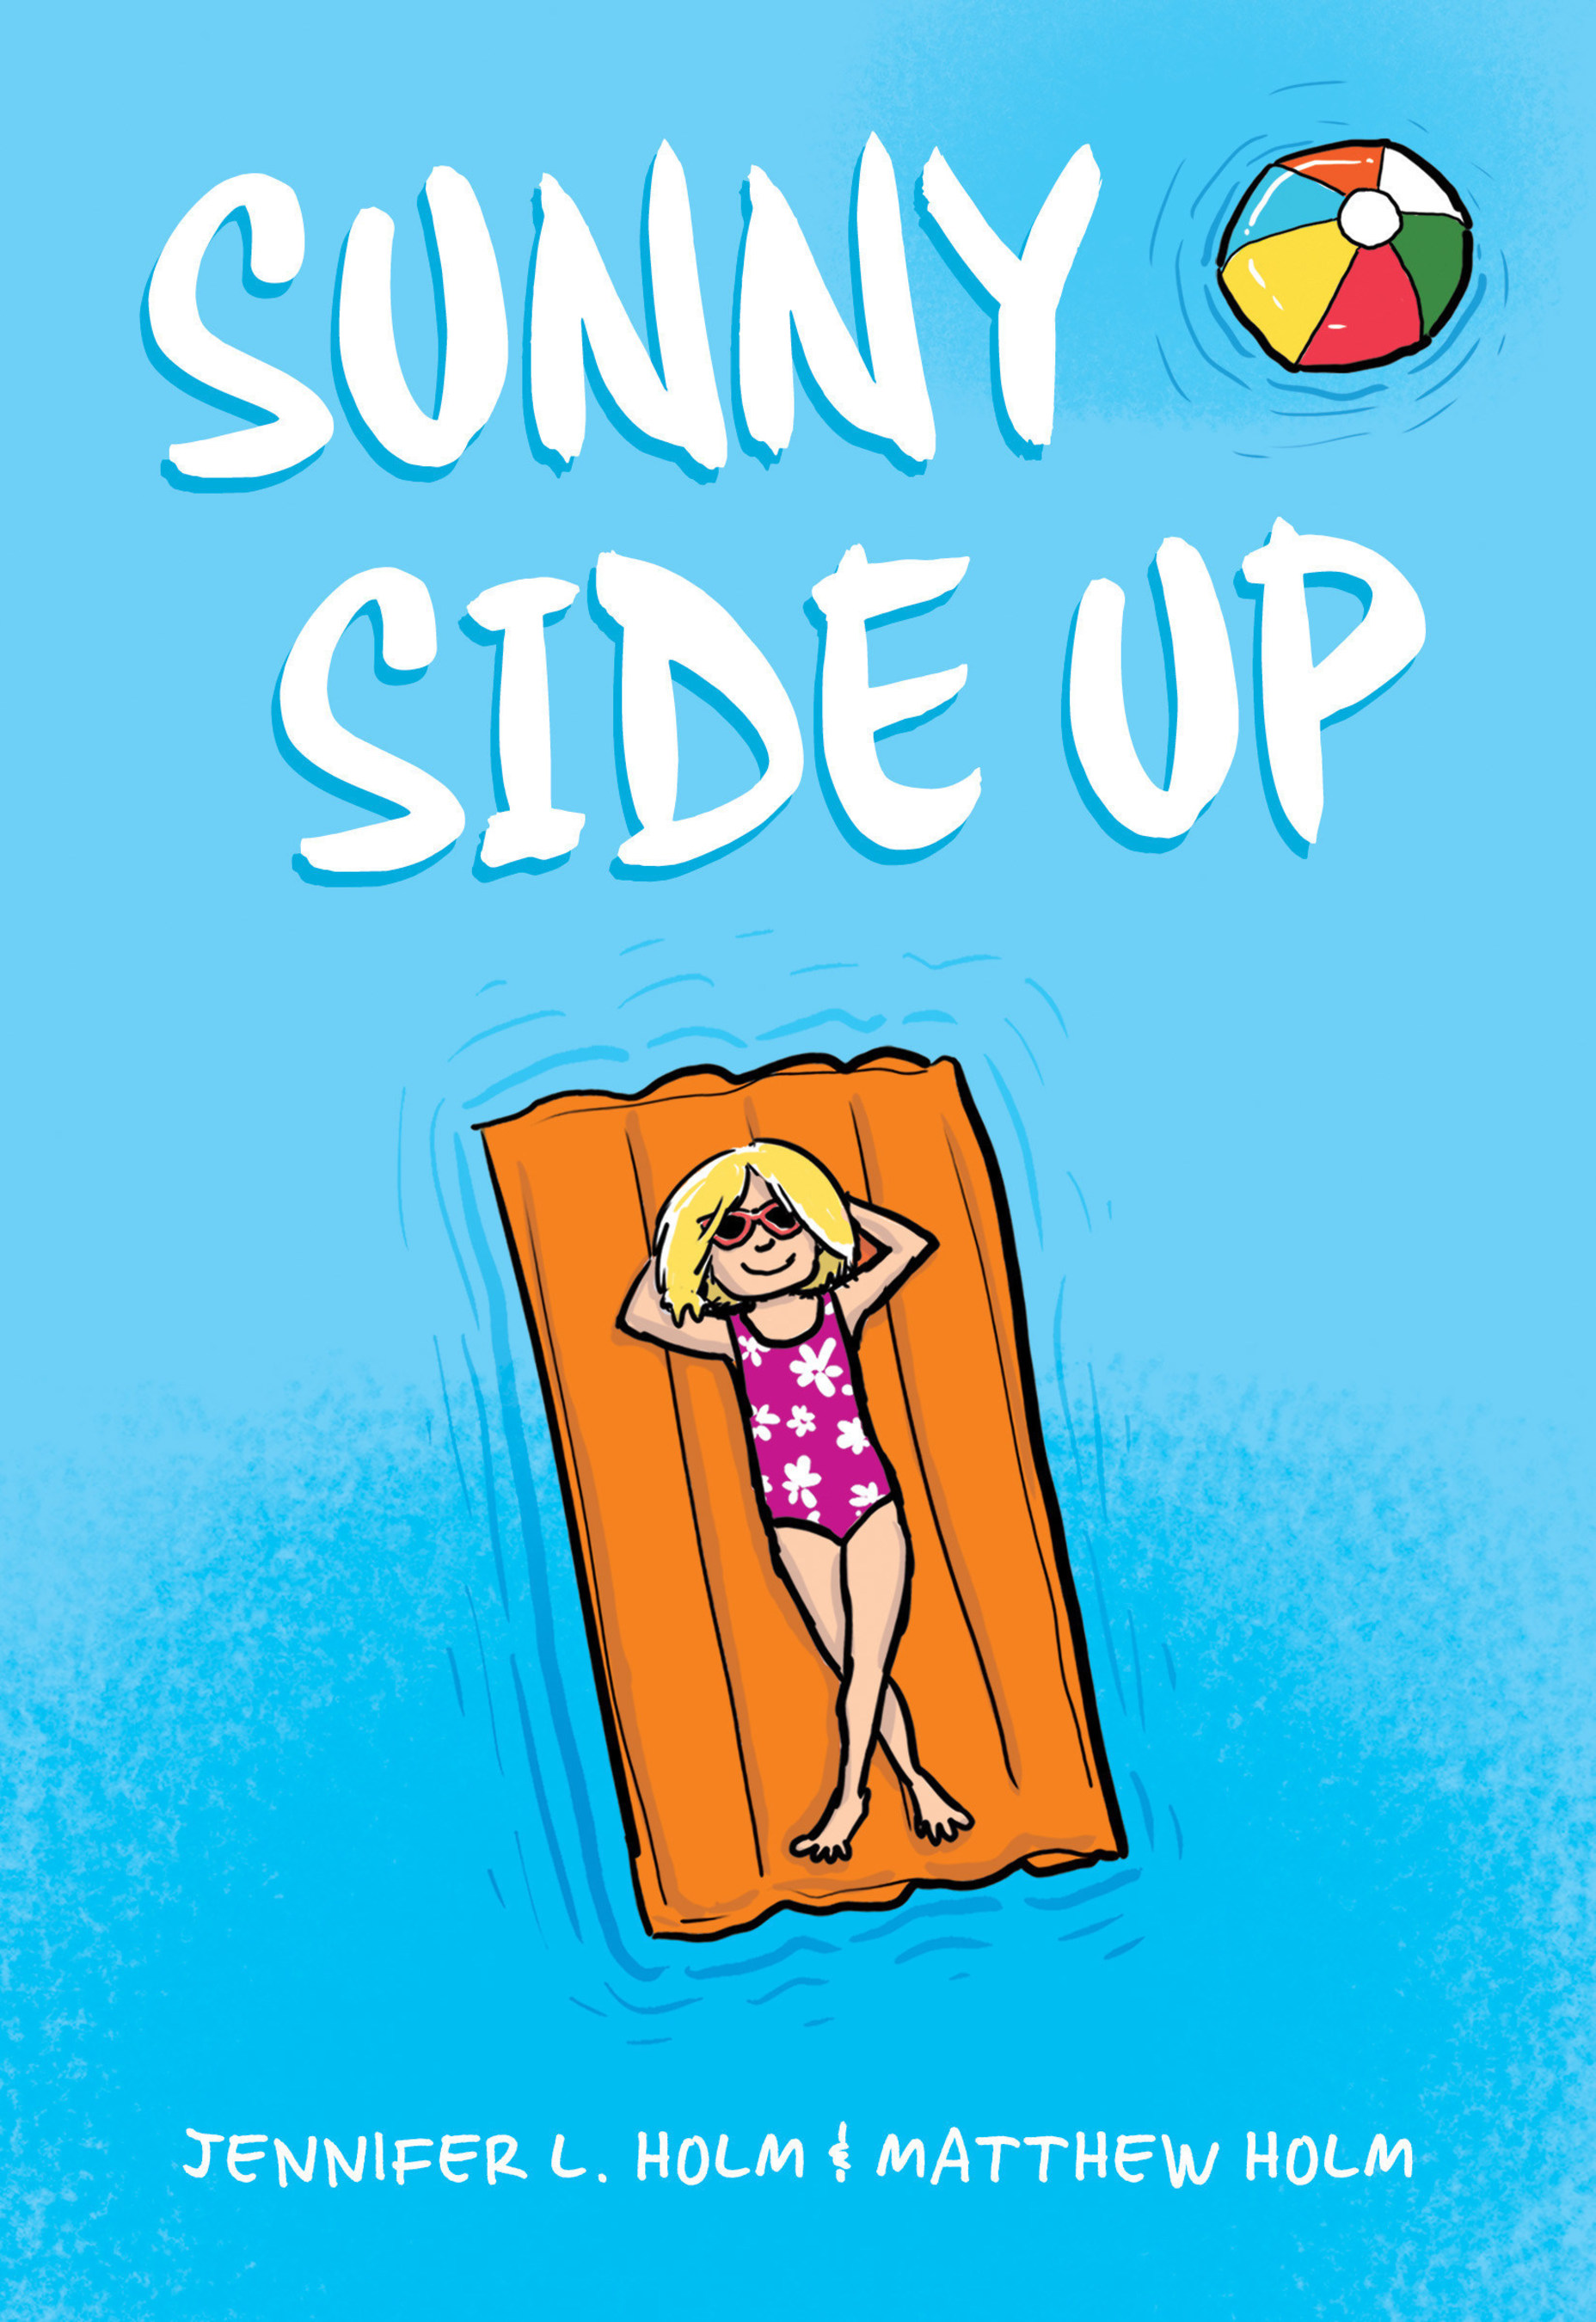 Sunny Side Up by Jennifer L. Holm and Matthew Holm, courtesy Graphix/Scholastic